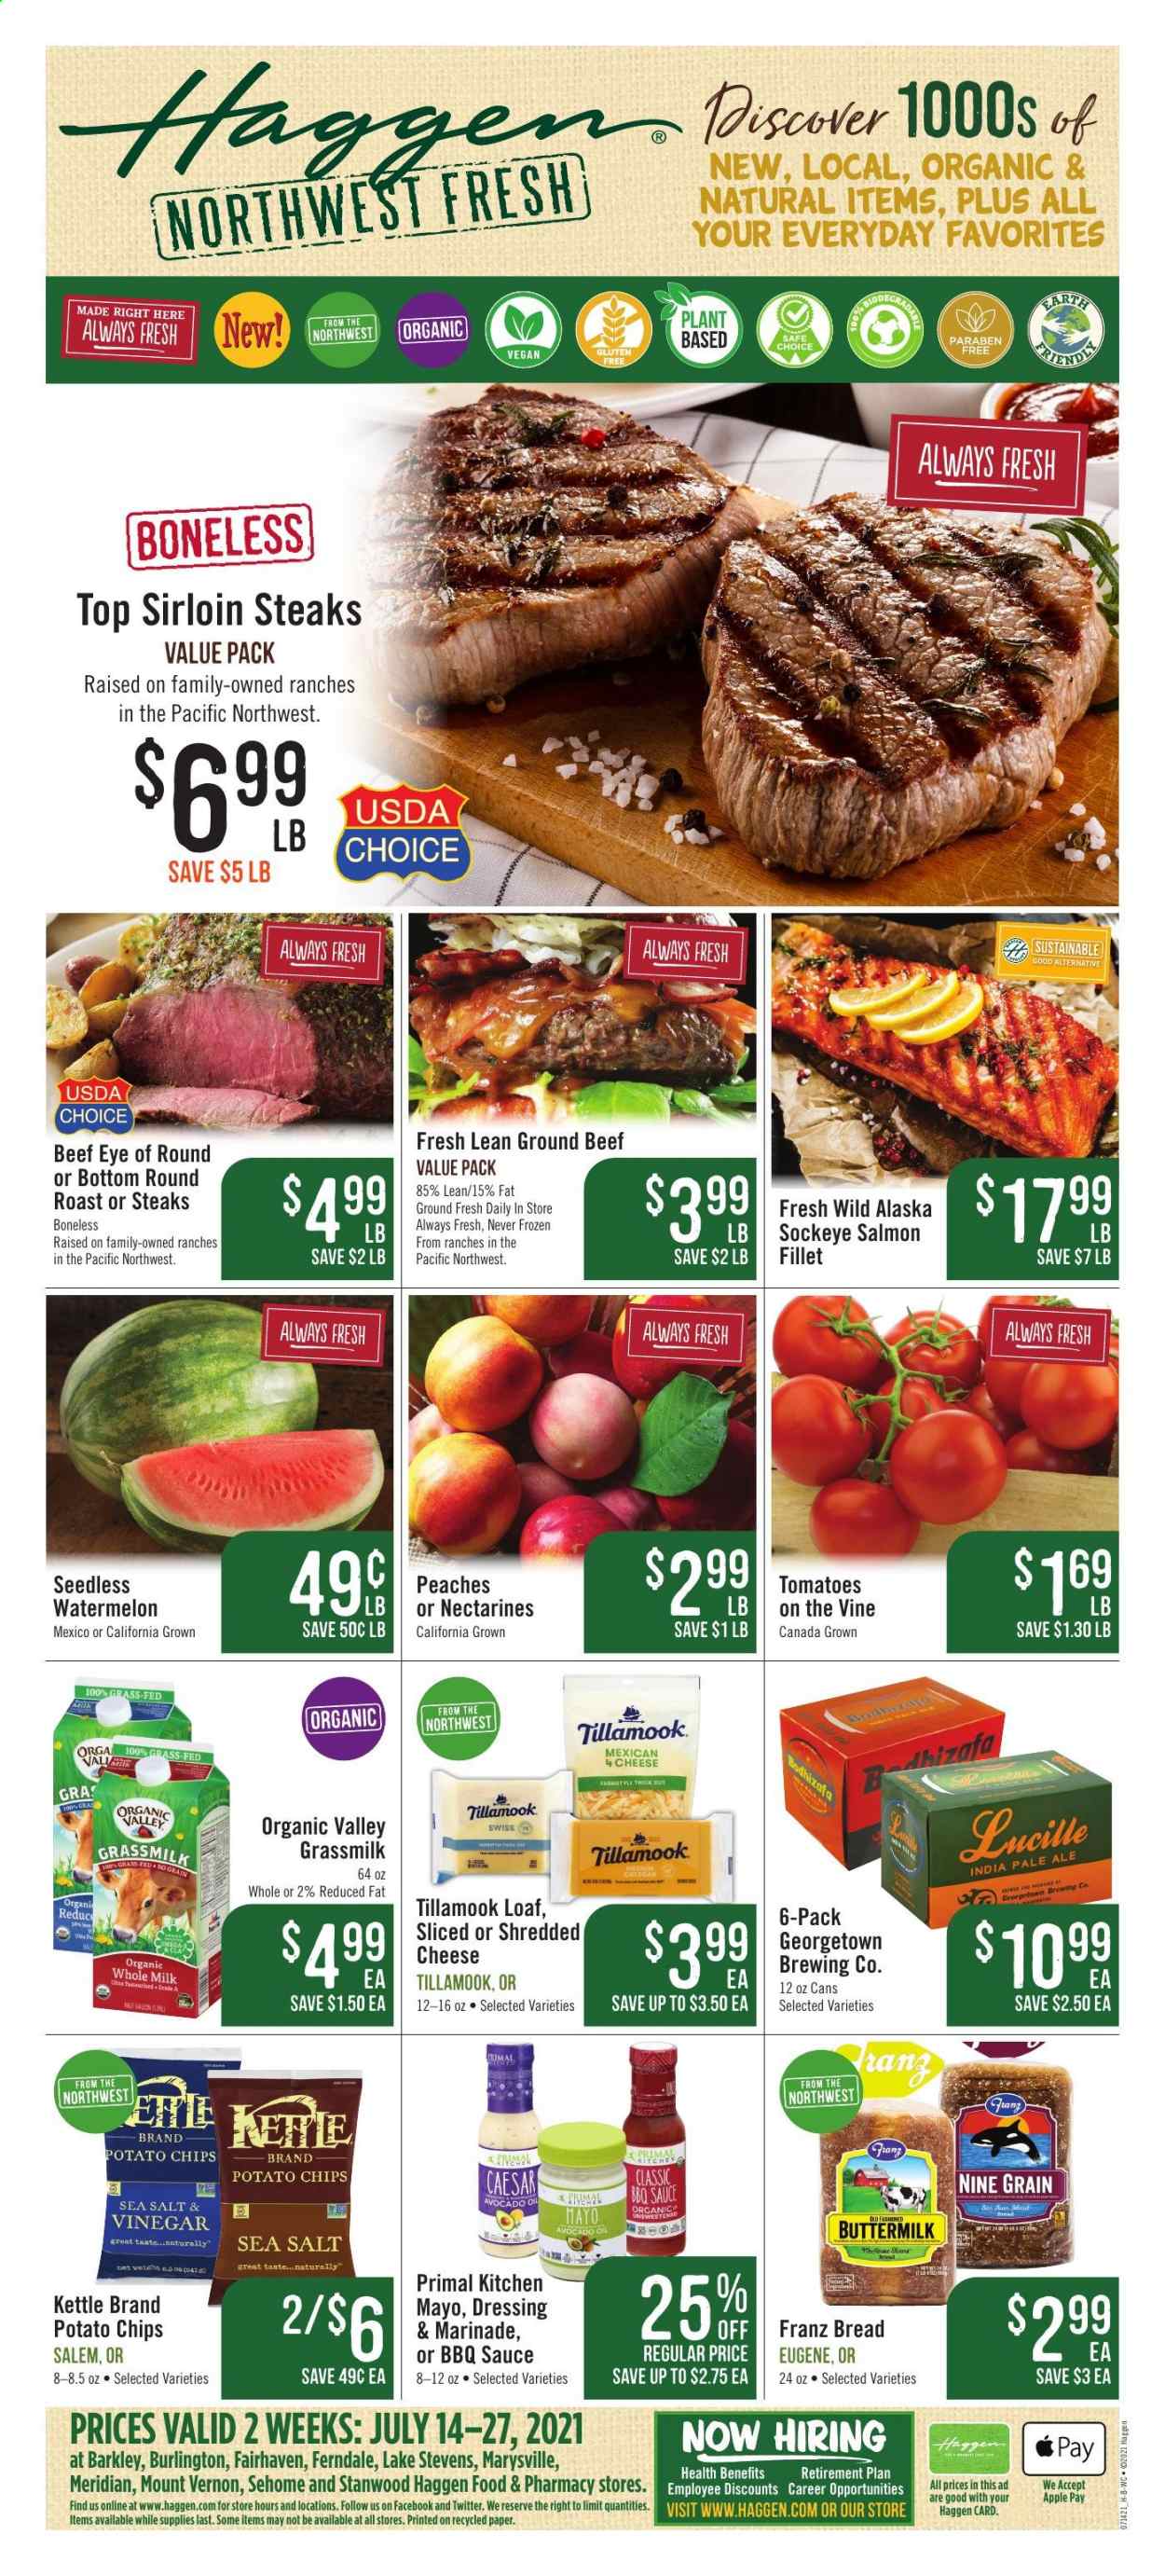 thumbnail - Haggen Flyer - 07/14/2021 - 07/27/2021 - Sales products - bread, tomatoes, watermelon, salmon, sauce, shredded cheese, buttermilk, potato chips, BBQ sauce, dressing, marinade, avocado oil, oil, beef meat, ground beef, steak, eye of round, round roast, sirloin steak, Primal, nectarines, peaches. Page 1.